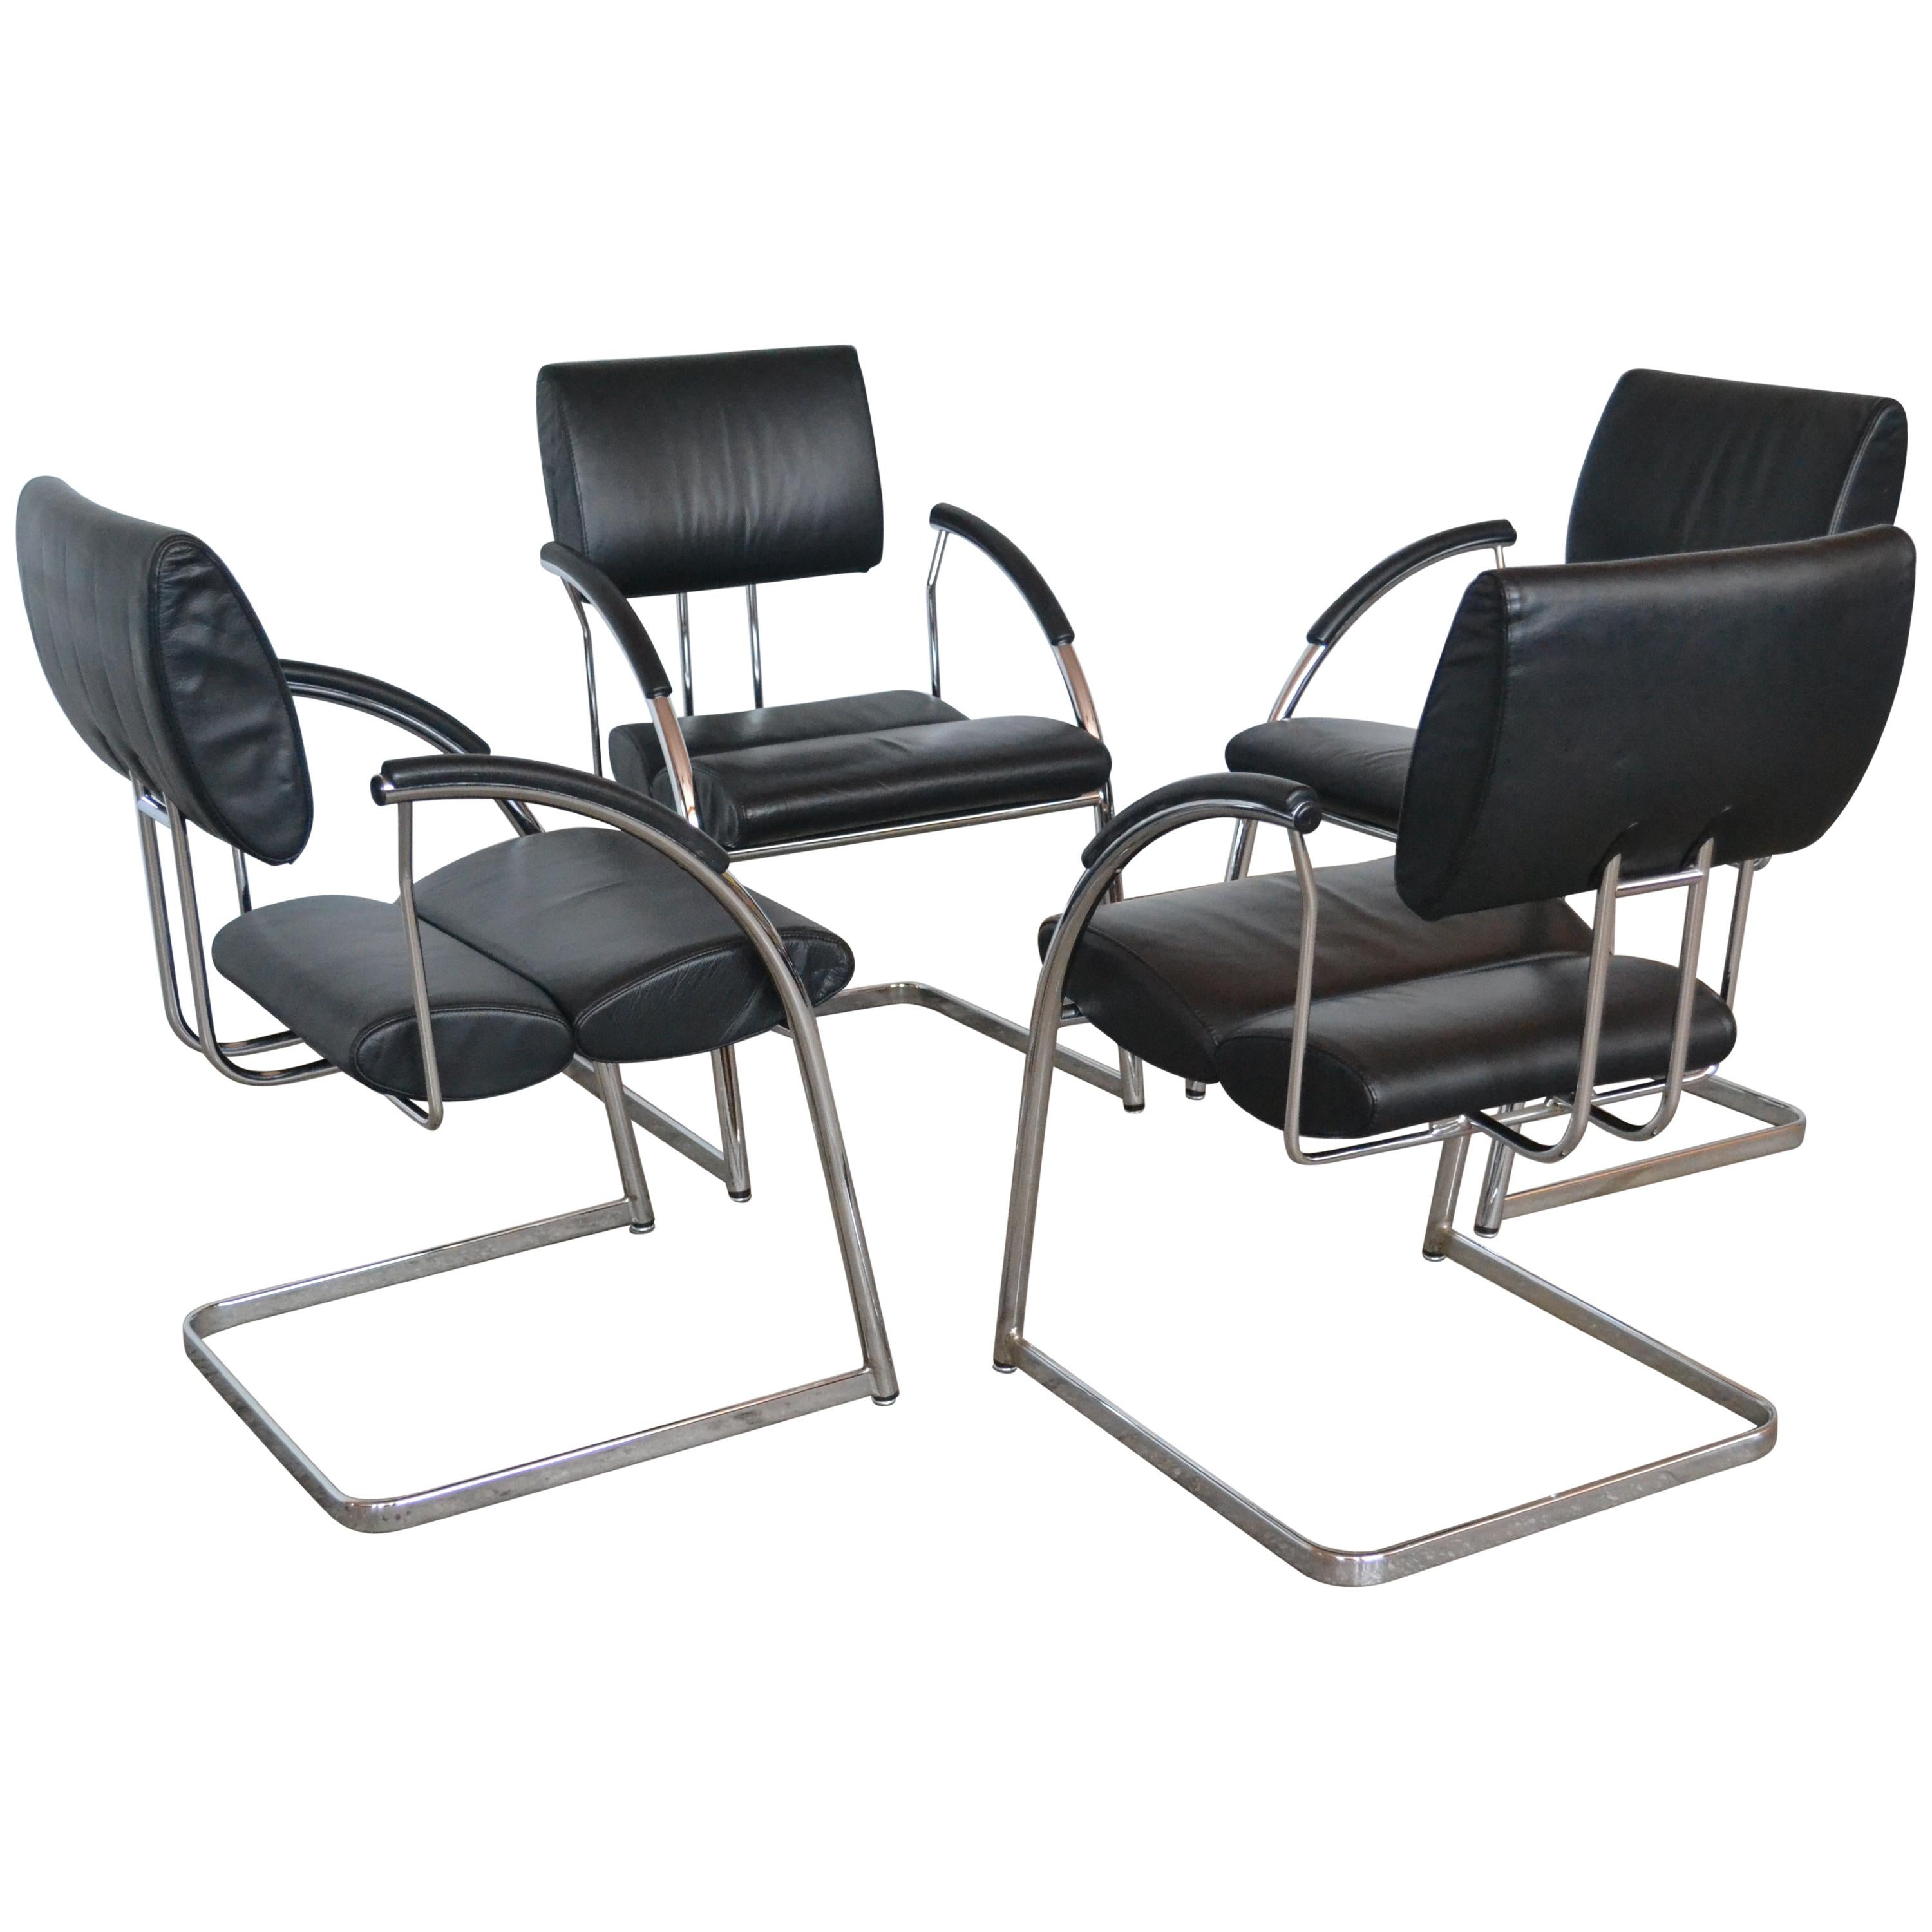 Set of Four Chairs Martin Stoll, 1990s im Angebot